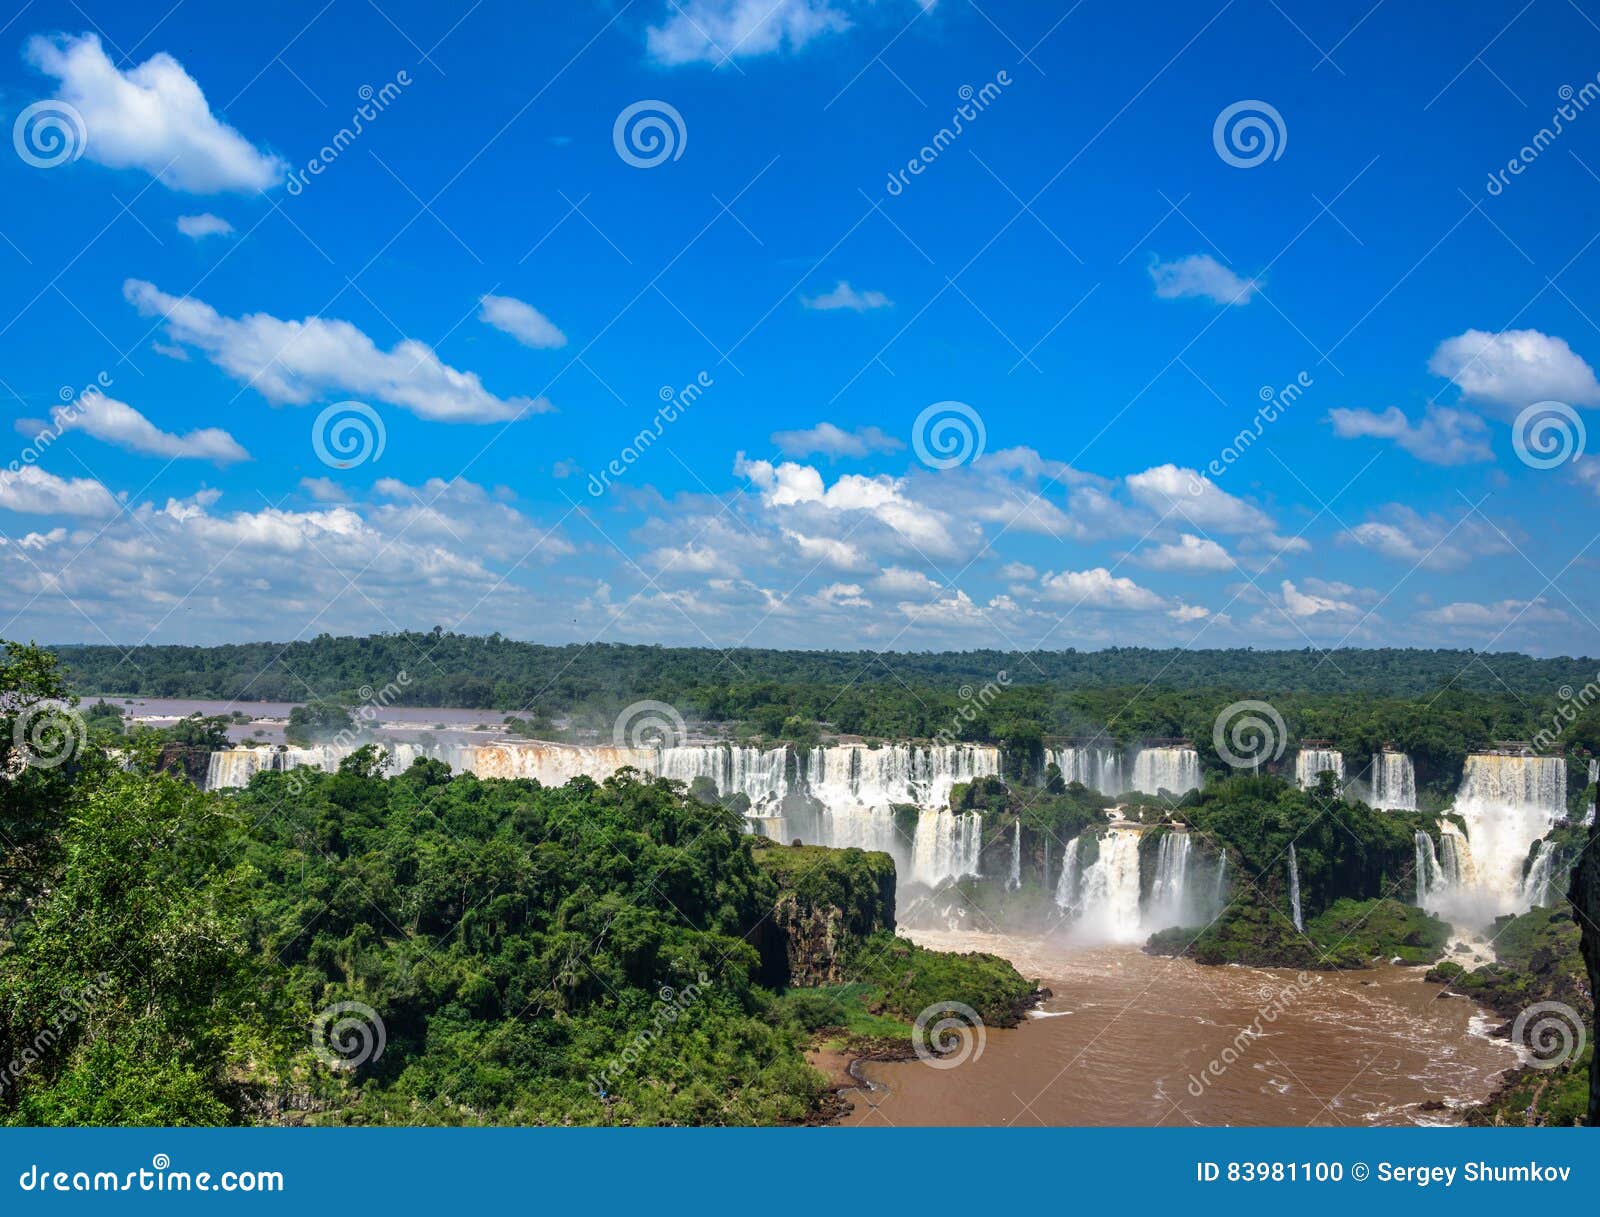 aerial view of the worlds largest and most impressive waterfalls in iguacu national park